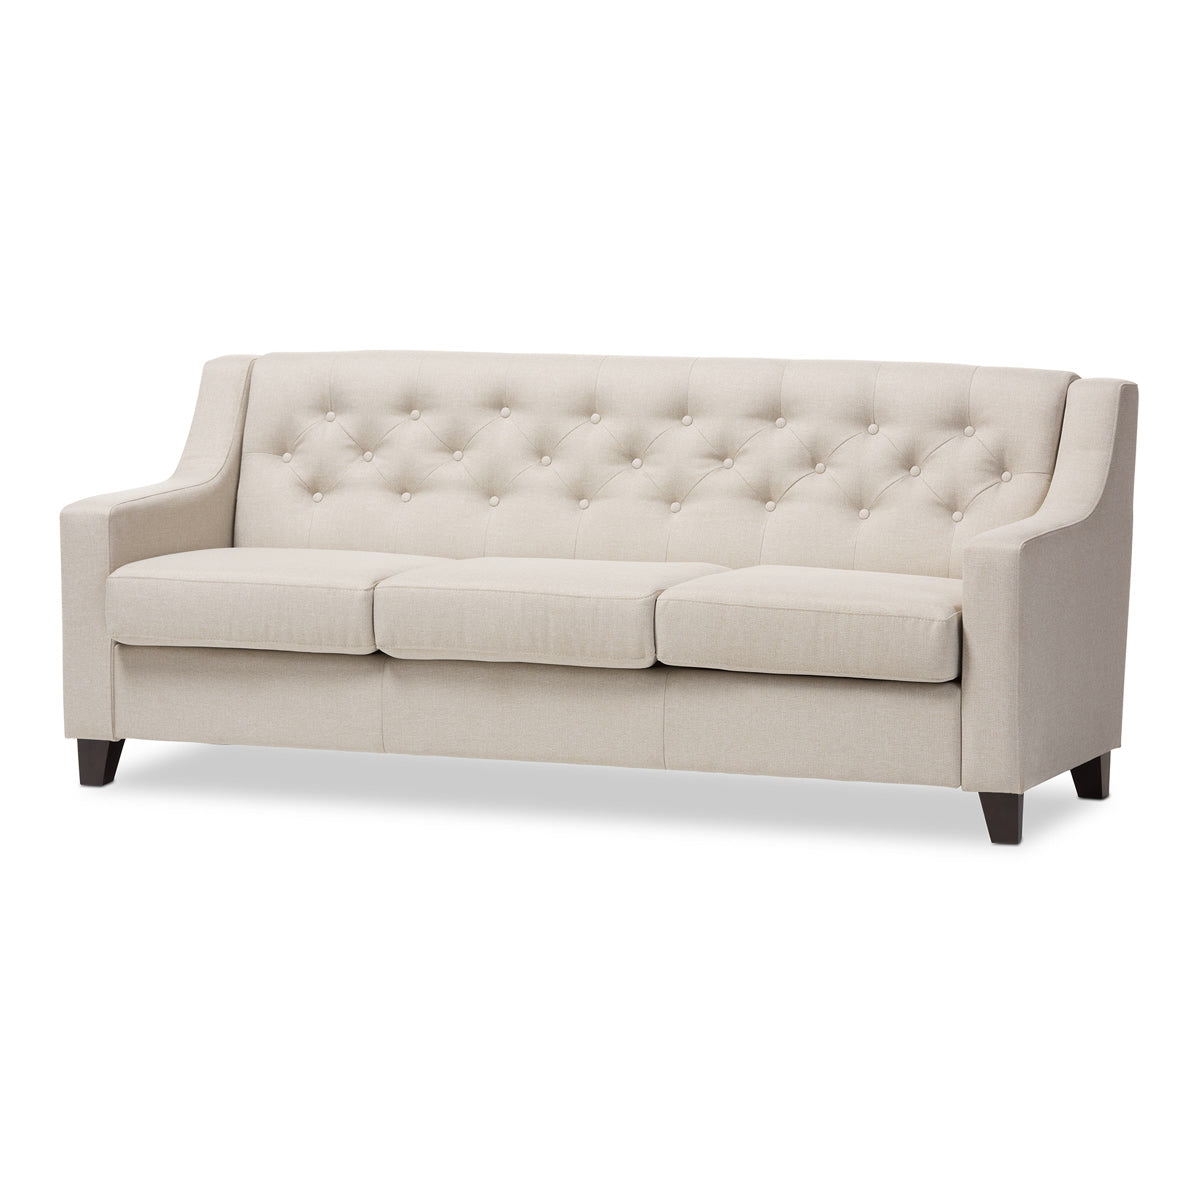 Baxton Studio Arcadia Modern and Contemporary Light Beige Fabric Upholstered Button-Tufted Living Room 3-Seater Sofa Baxton Studio-sofas-Minimal And Modern - 2